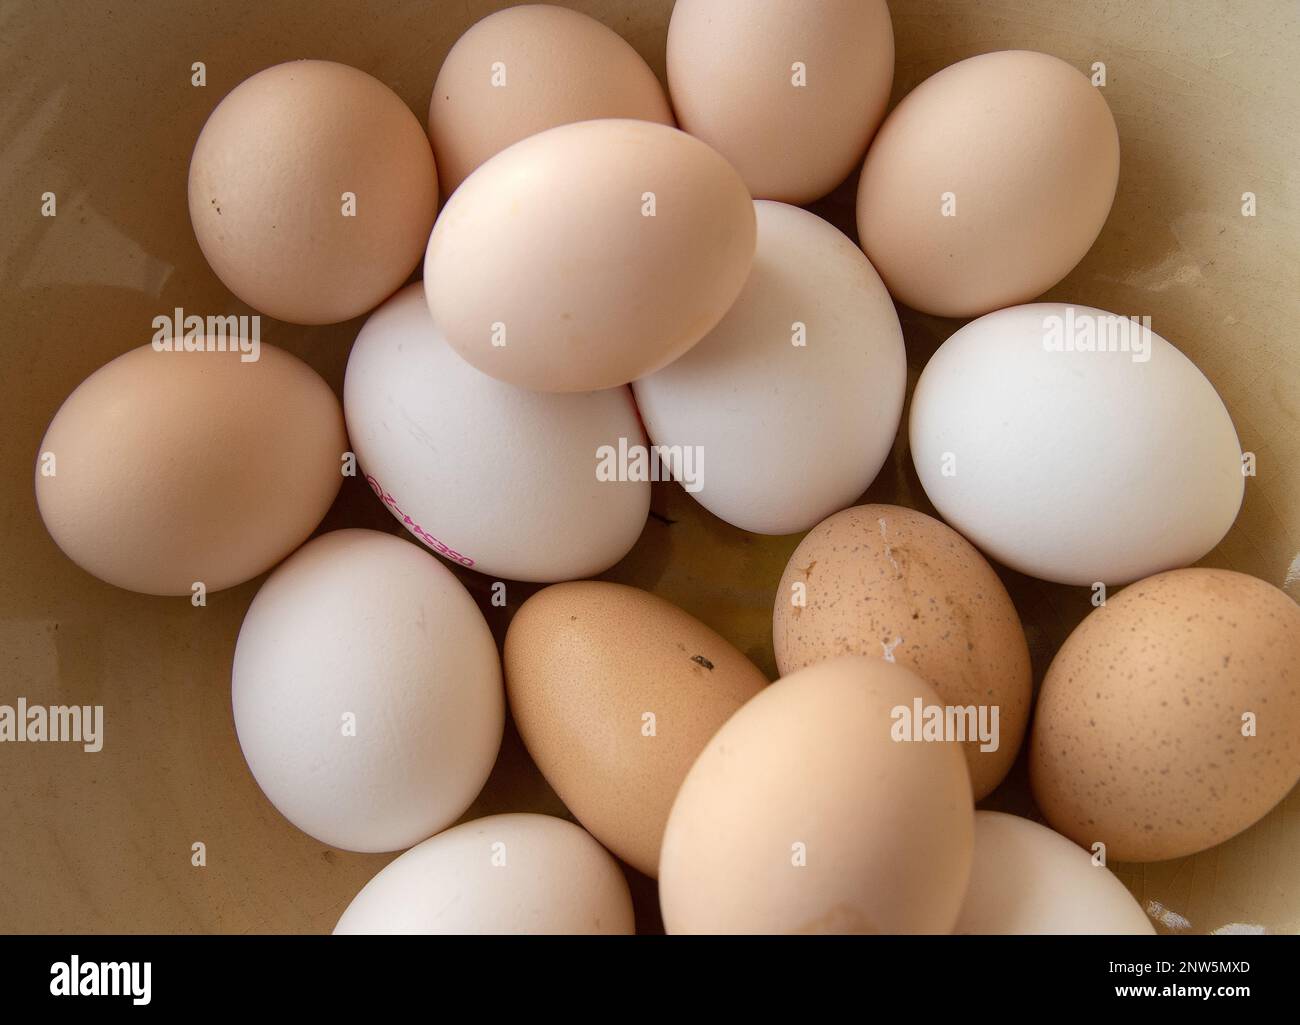 variety of different colored farm fresh eggs in a bowl Stock Photo